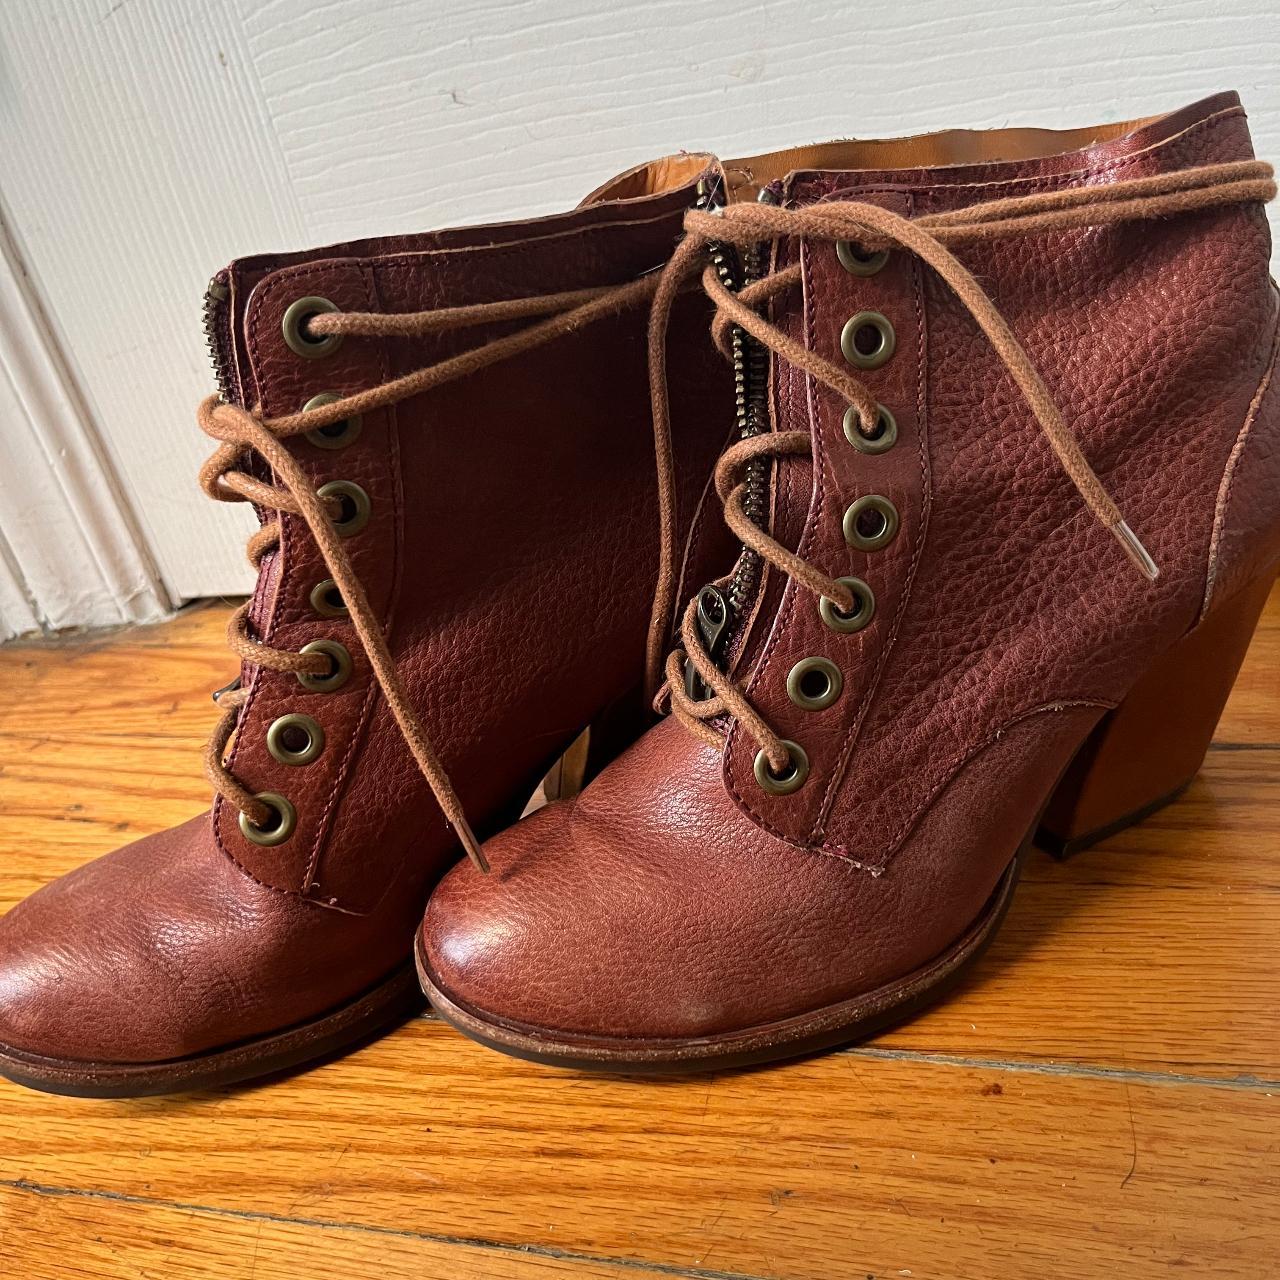 Korks Women's Tan and Burgundy Boots (2)